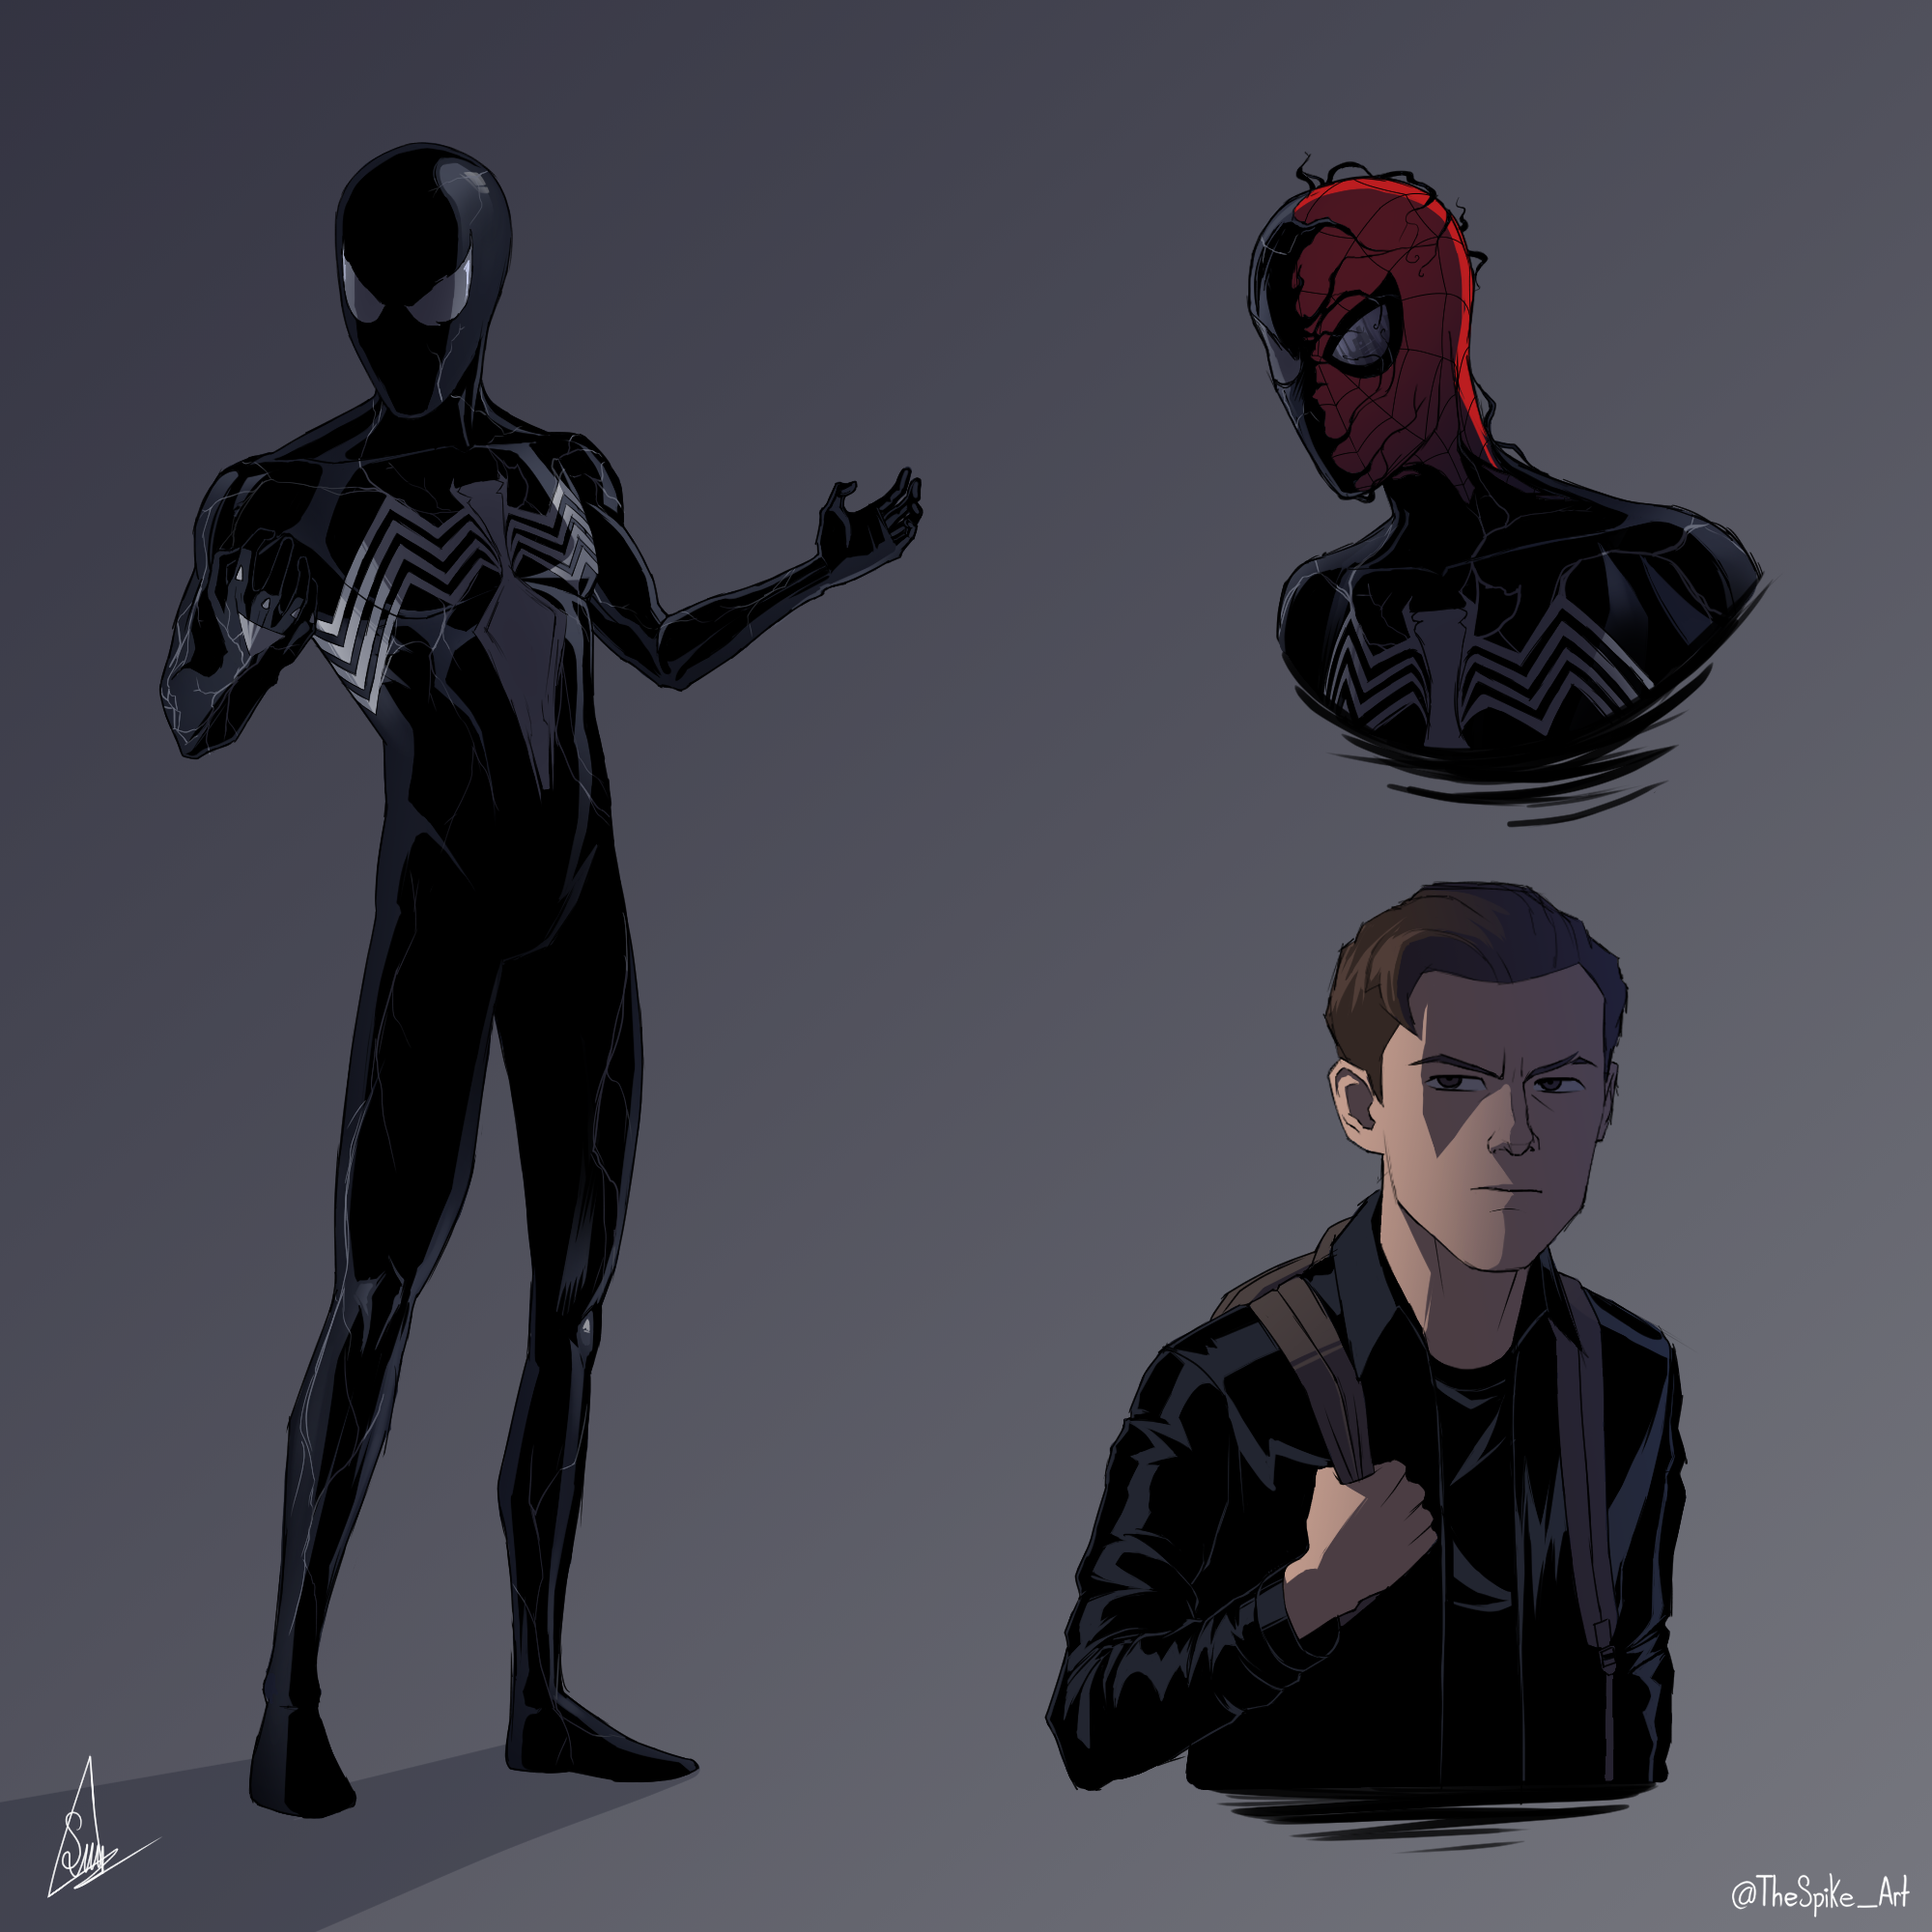 MCU Spider-Man with the symbiote suit by MrSpikeArt on DeviantArt